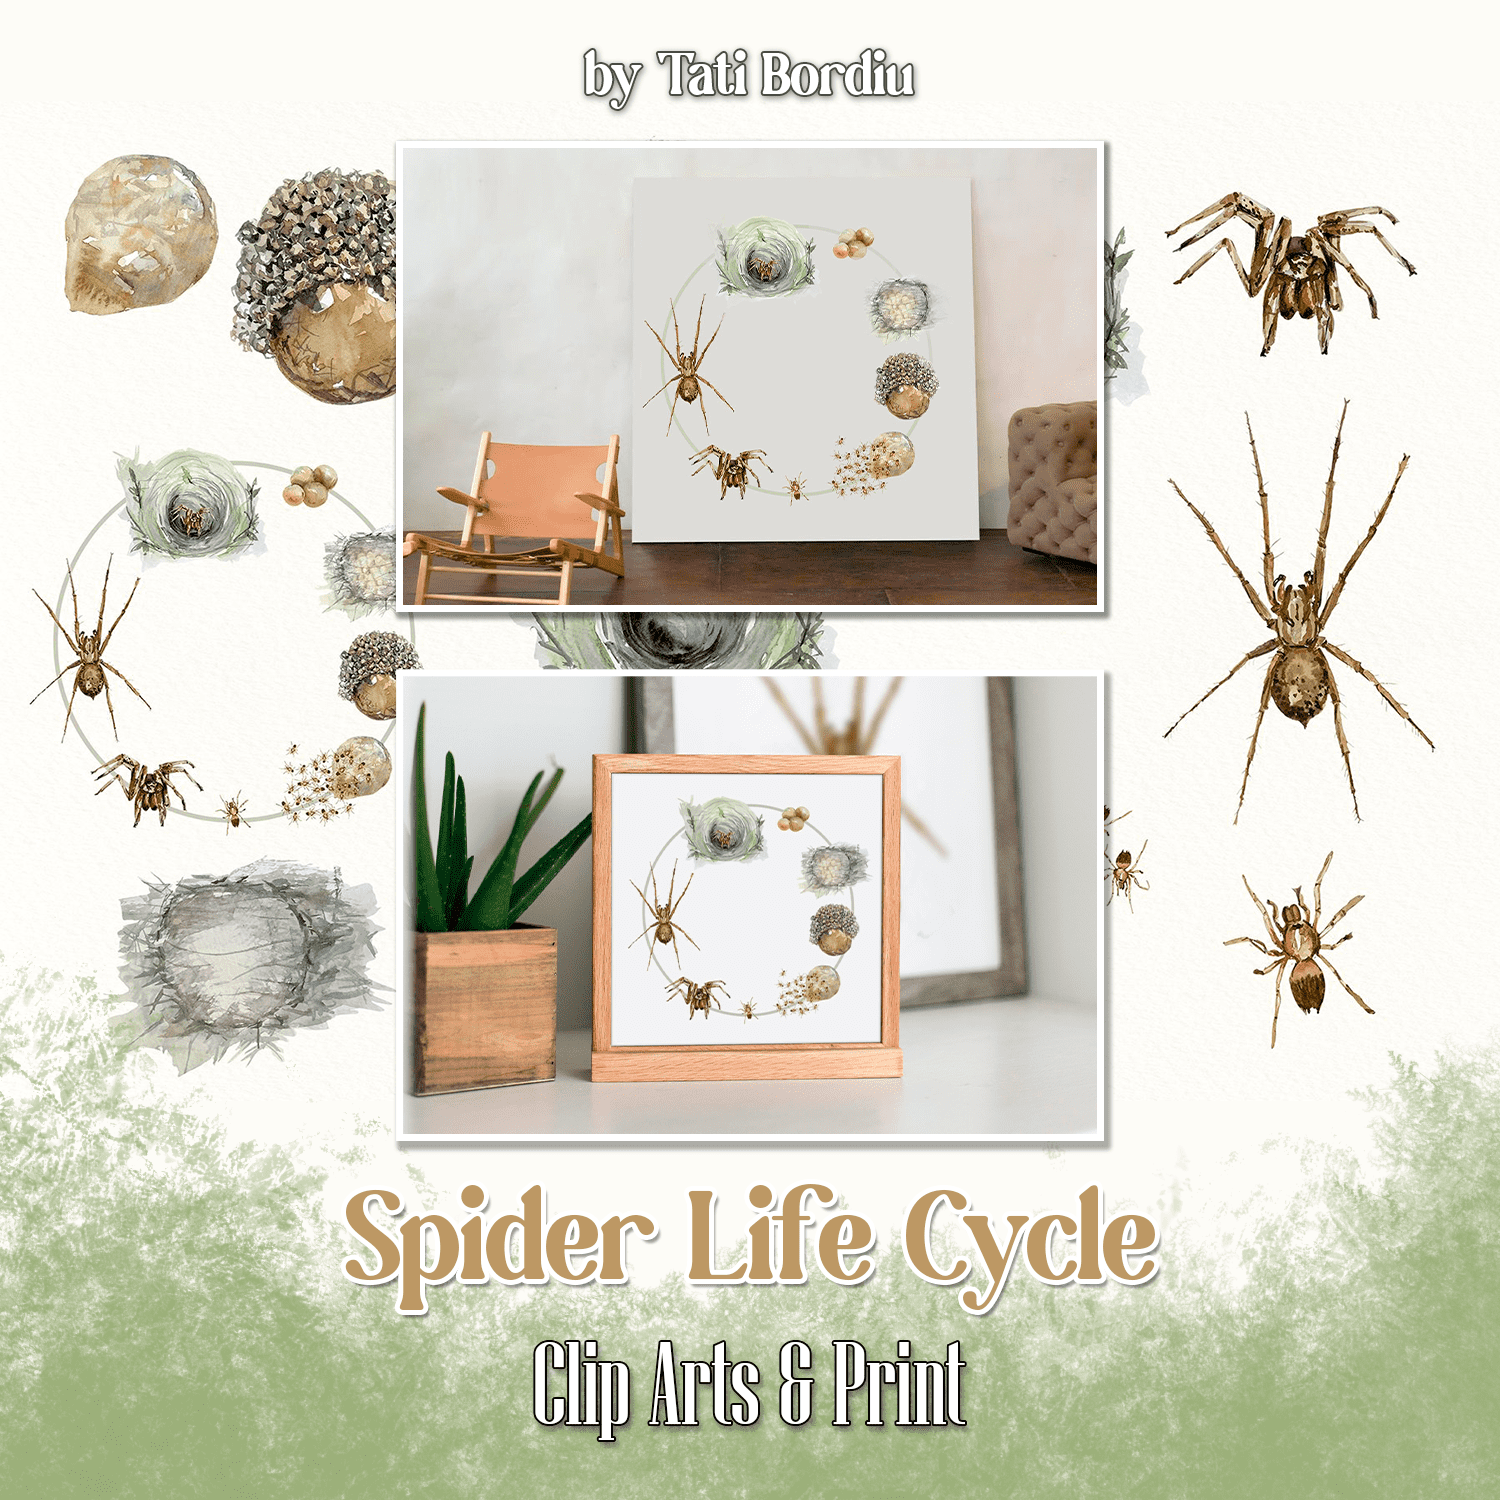 Spider Life Cycle Clip Arts & Print cover.